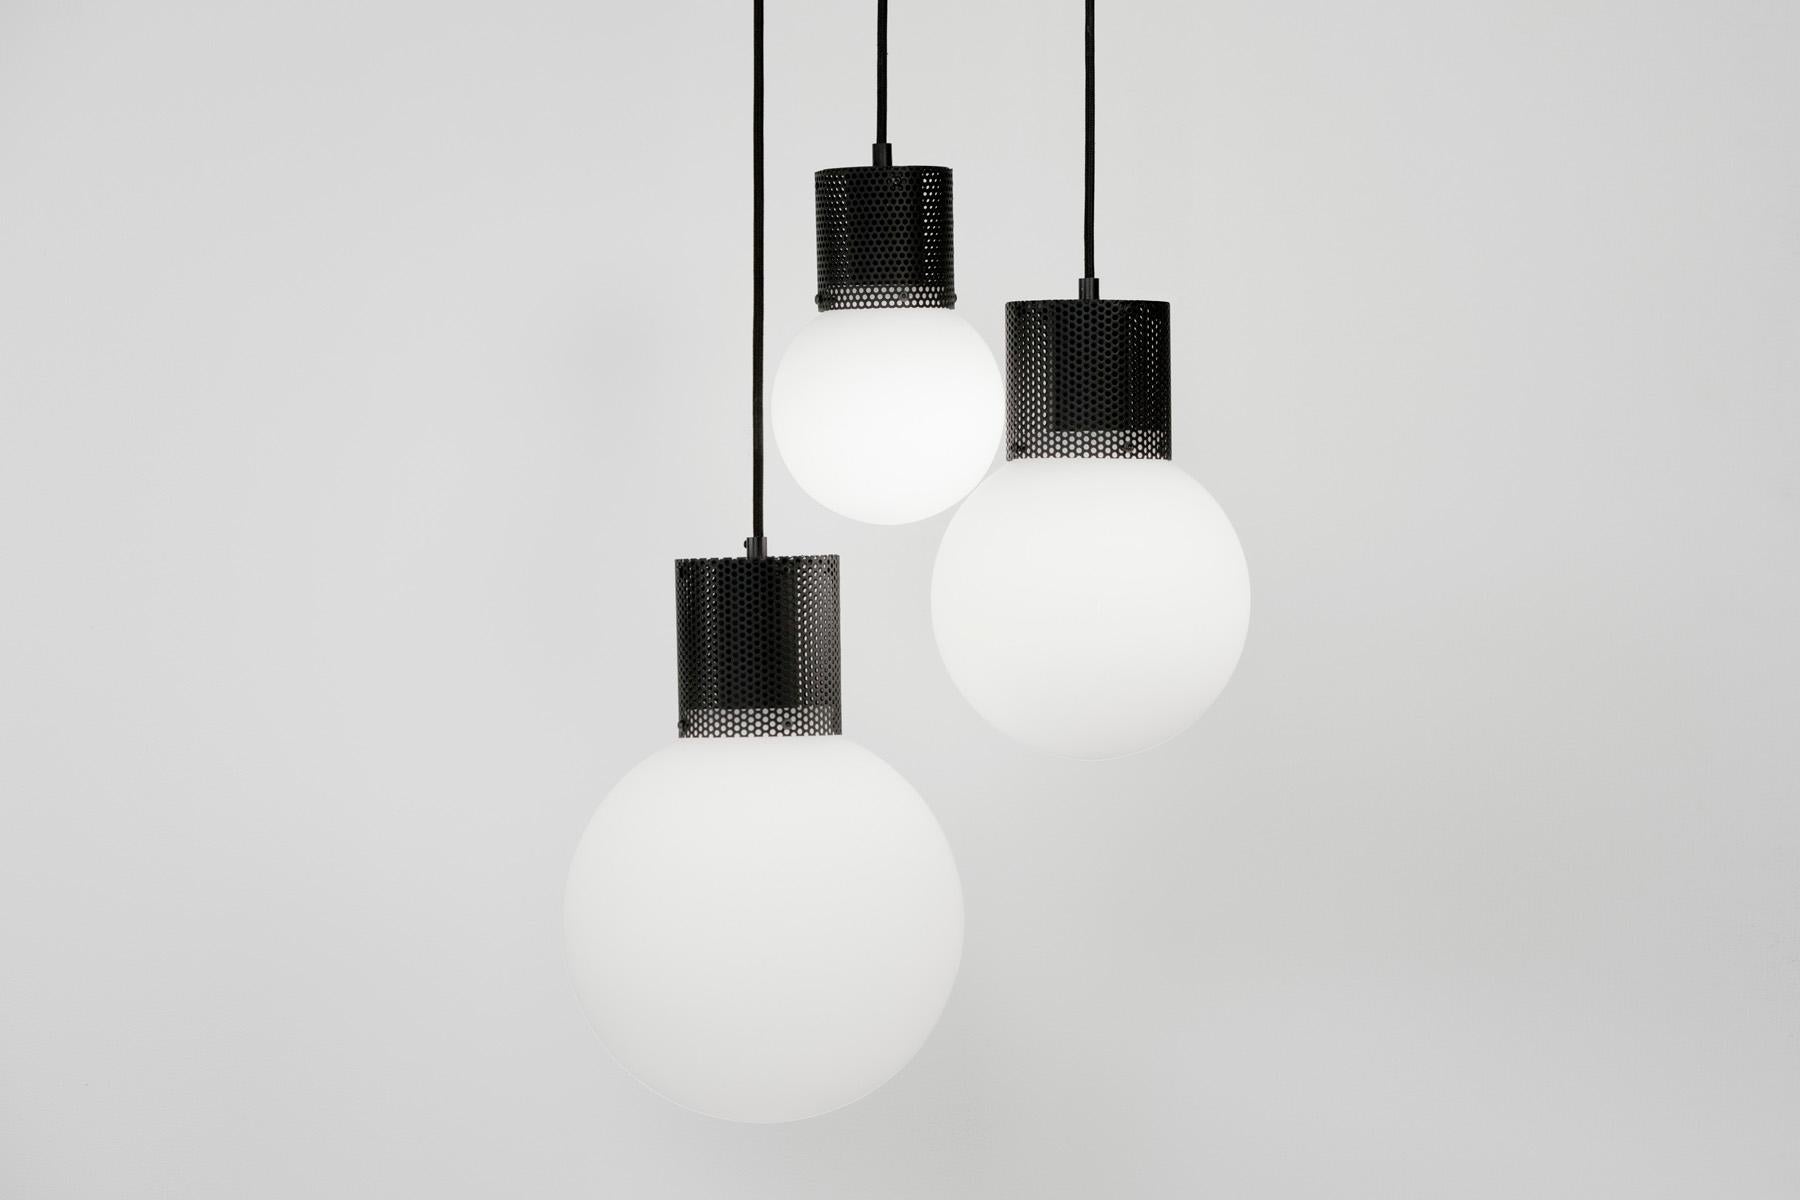 Combining hand blown opal glass with a perforated metal housing, Perf pendant is an elemental and versatile decorative fixture.
Utilizing a low energy LED bulb, Perf pendant is available in 3 sizes and 3 finishes, with custom colors available.
This